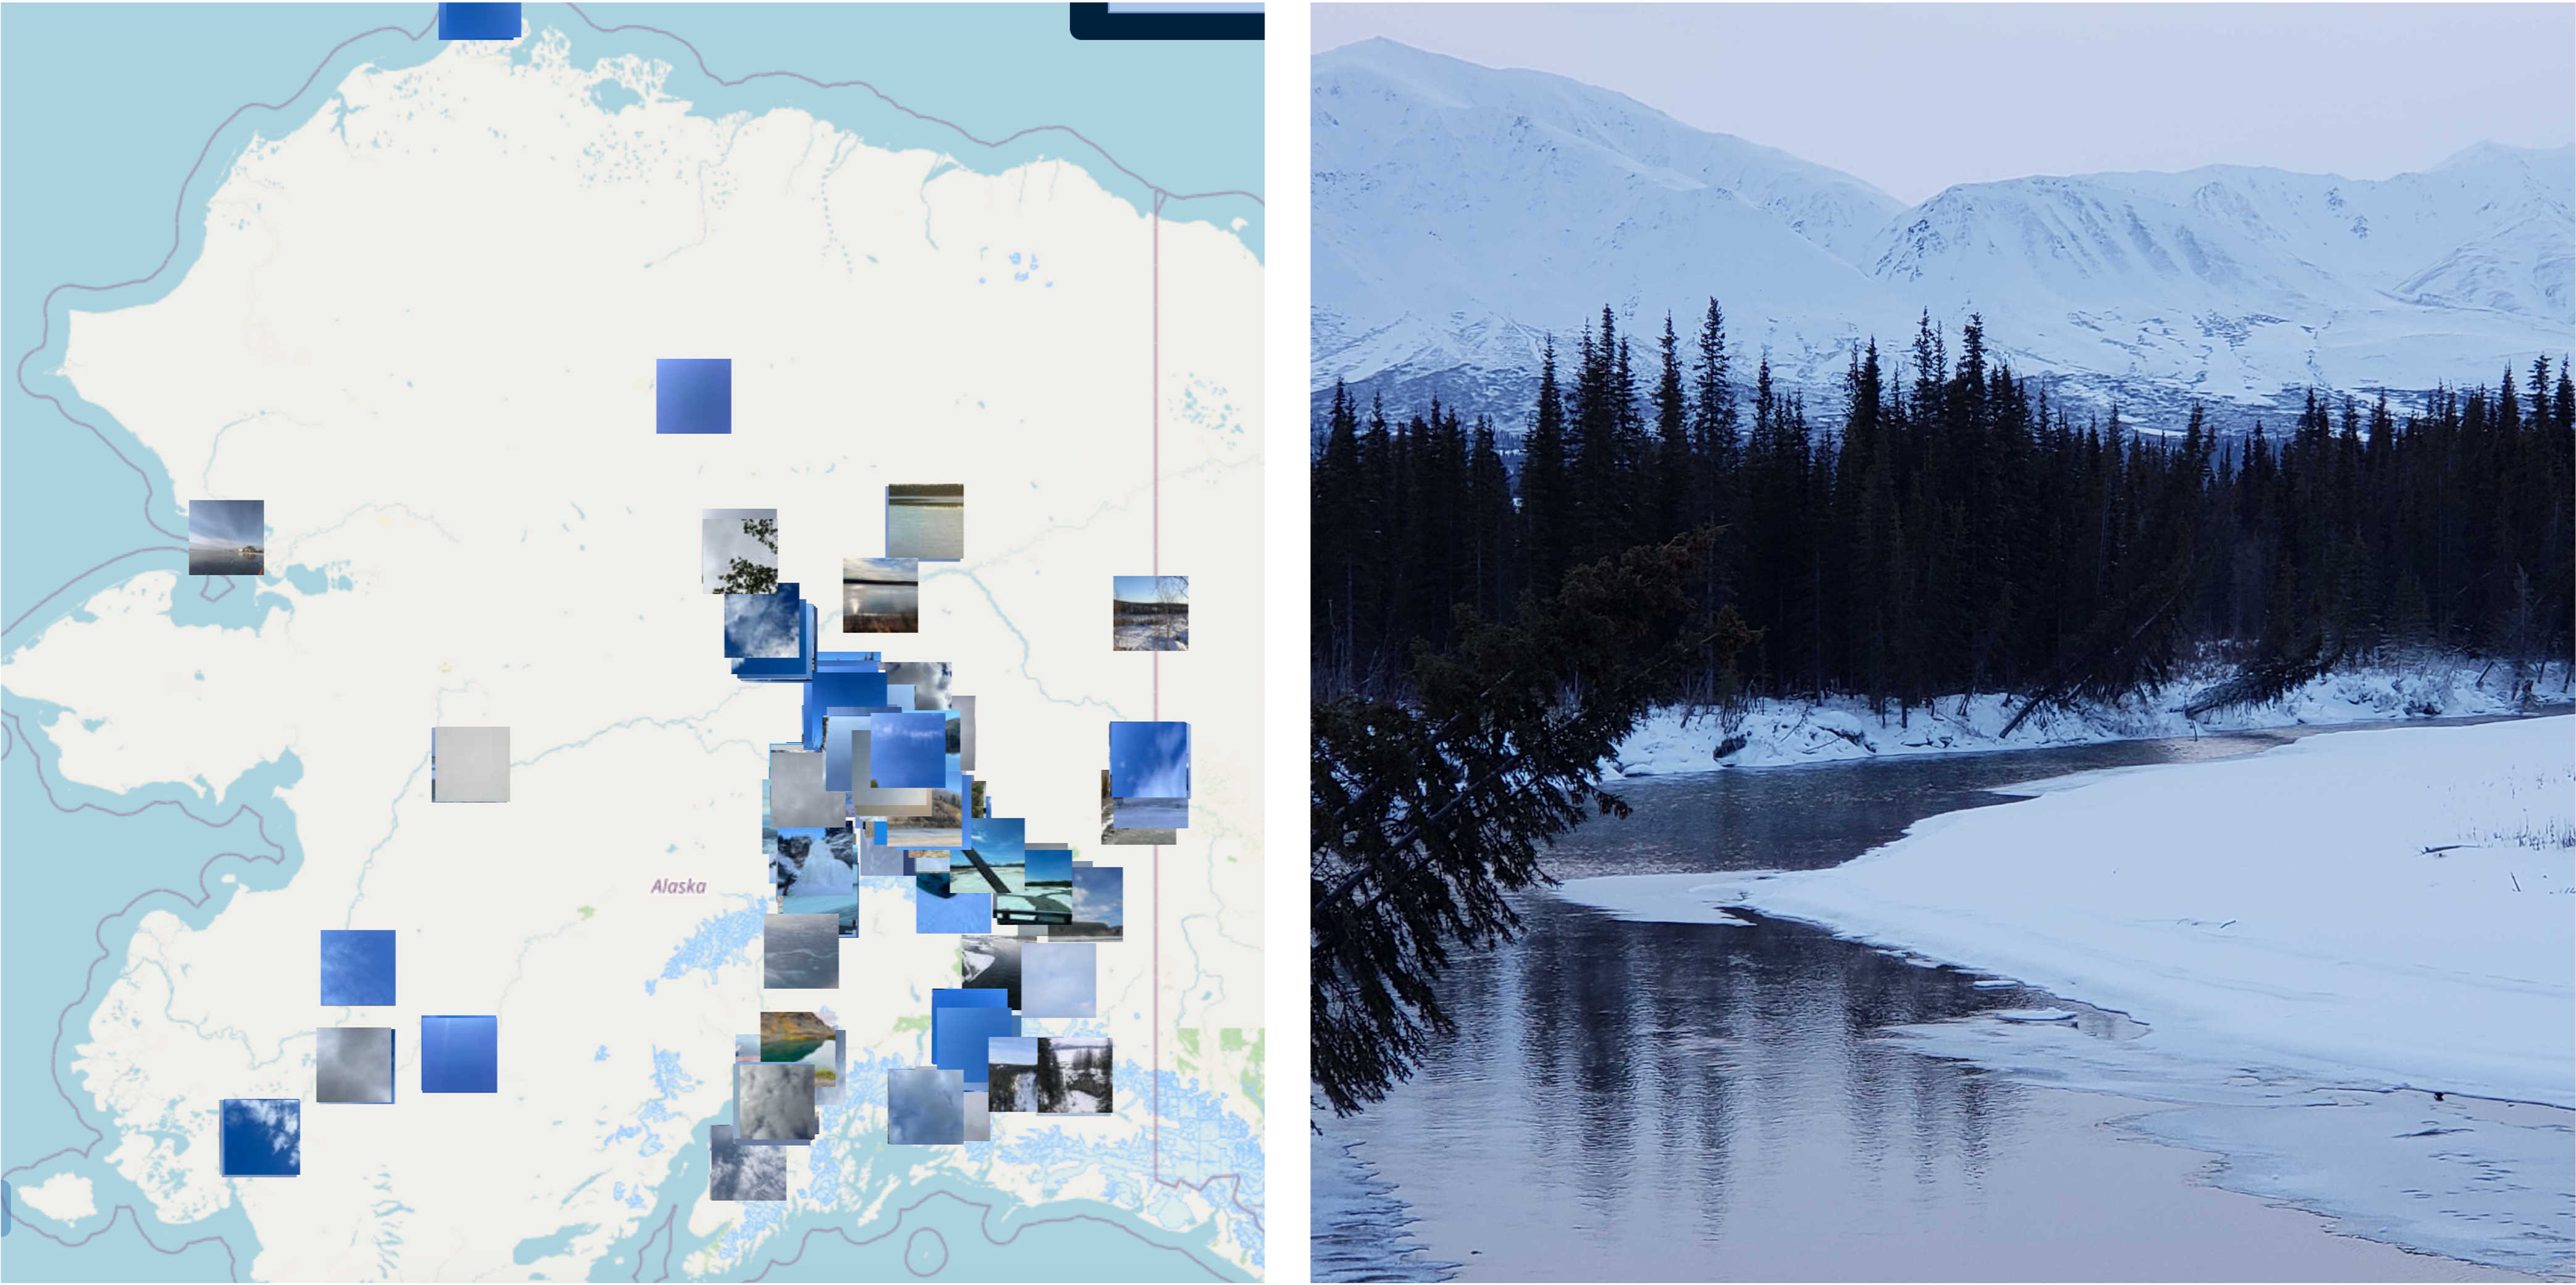 The left image shows an unlabeled map of Alaska with land in white and water in blue. Photo thumbnails on the map indicate where people have taken GLOBE Observer land cover observations. The observations are primarily along rivers. On the right is a photo of a river surrounded by a snow-covered landscape and evergreen trees. 